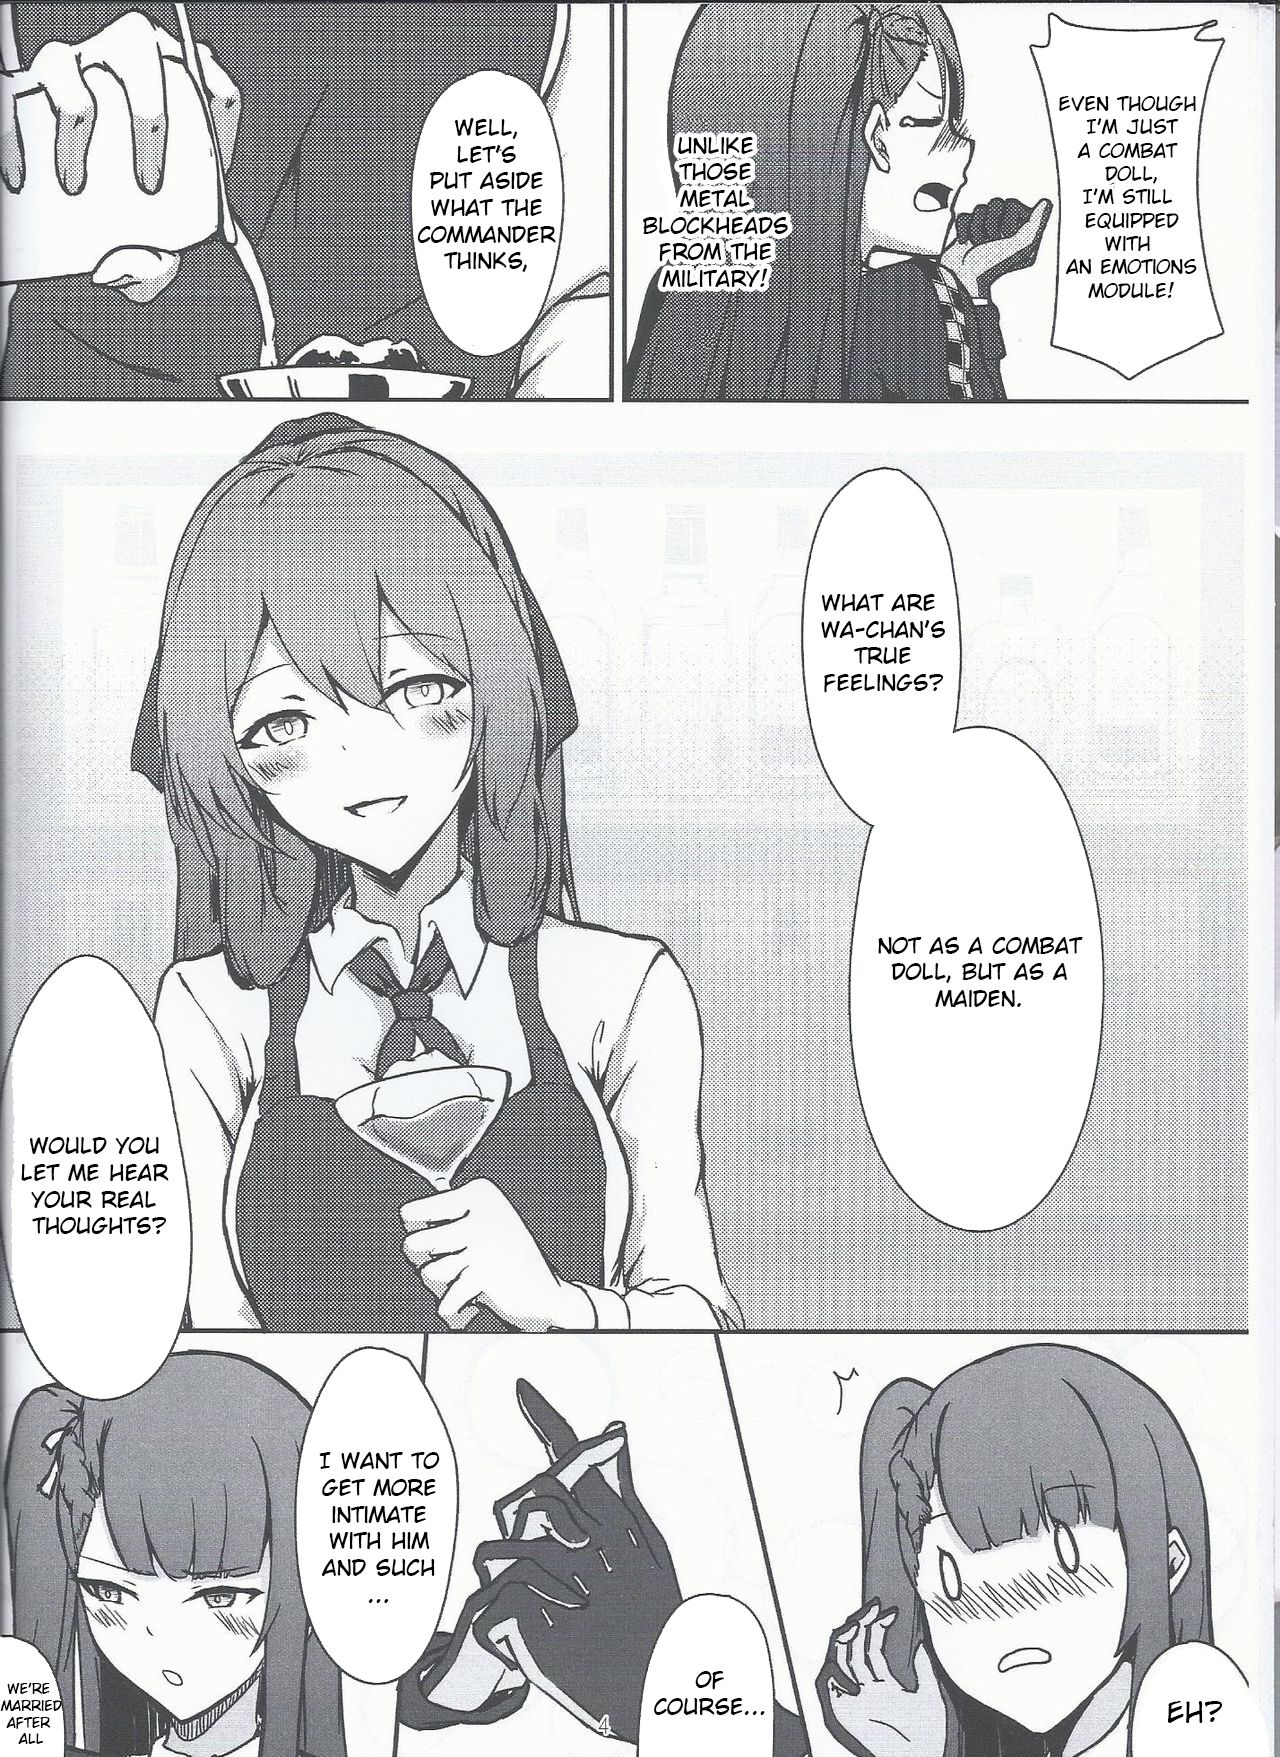 (FF32) [Sumi (九曜)] I don't know what to title this book, but anyway it's about WA2000 (Girls Frontline) [English] page 3 full